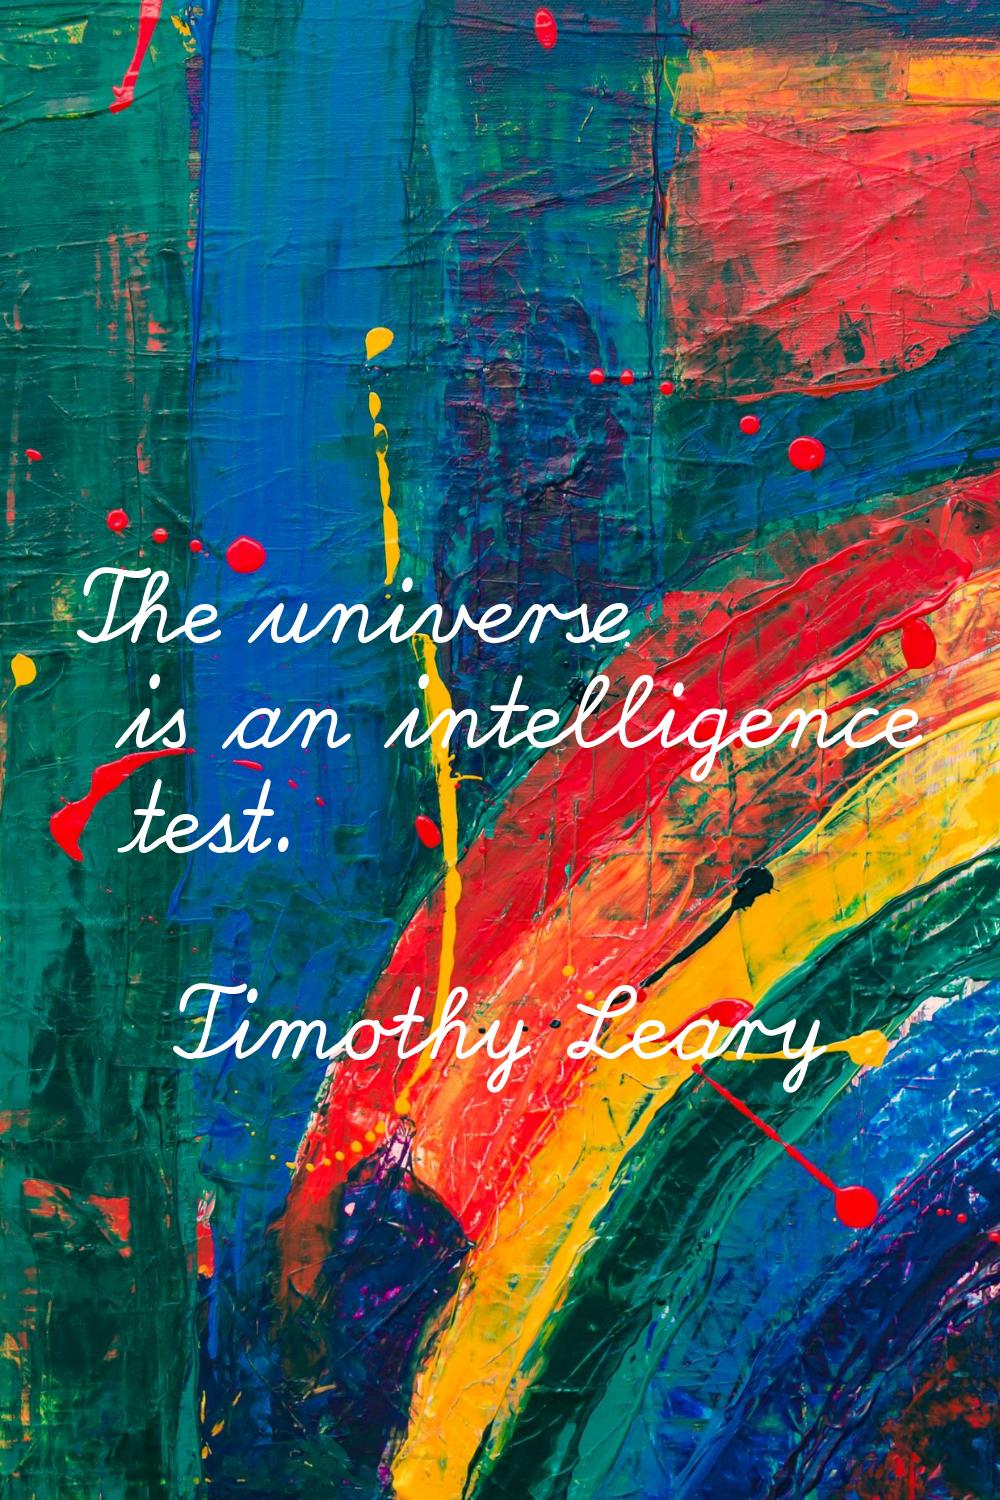 The universe is an intelligence test.